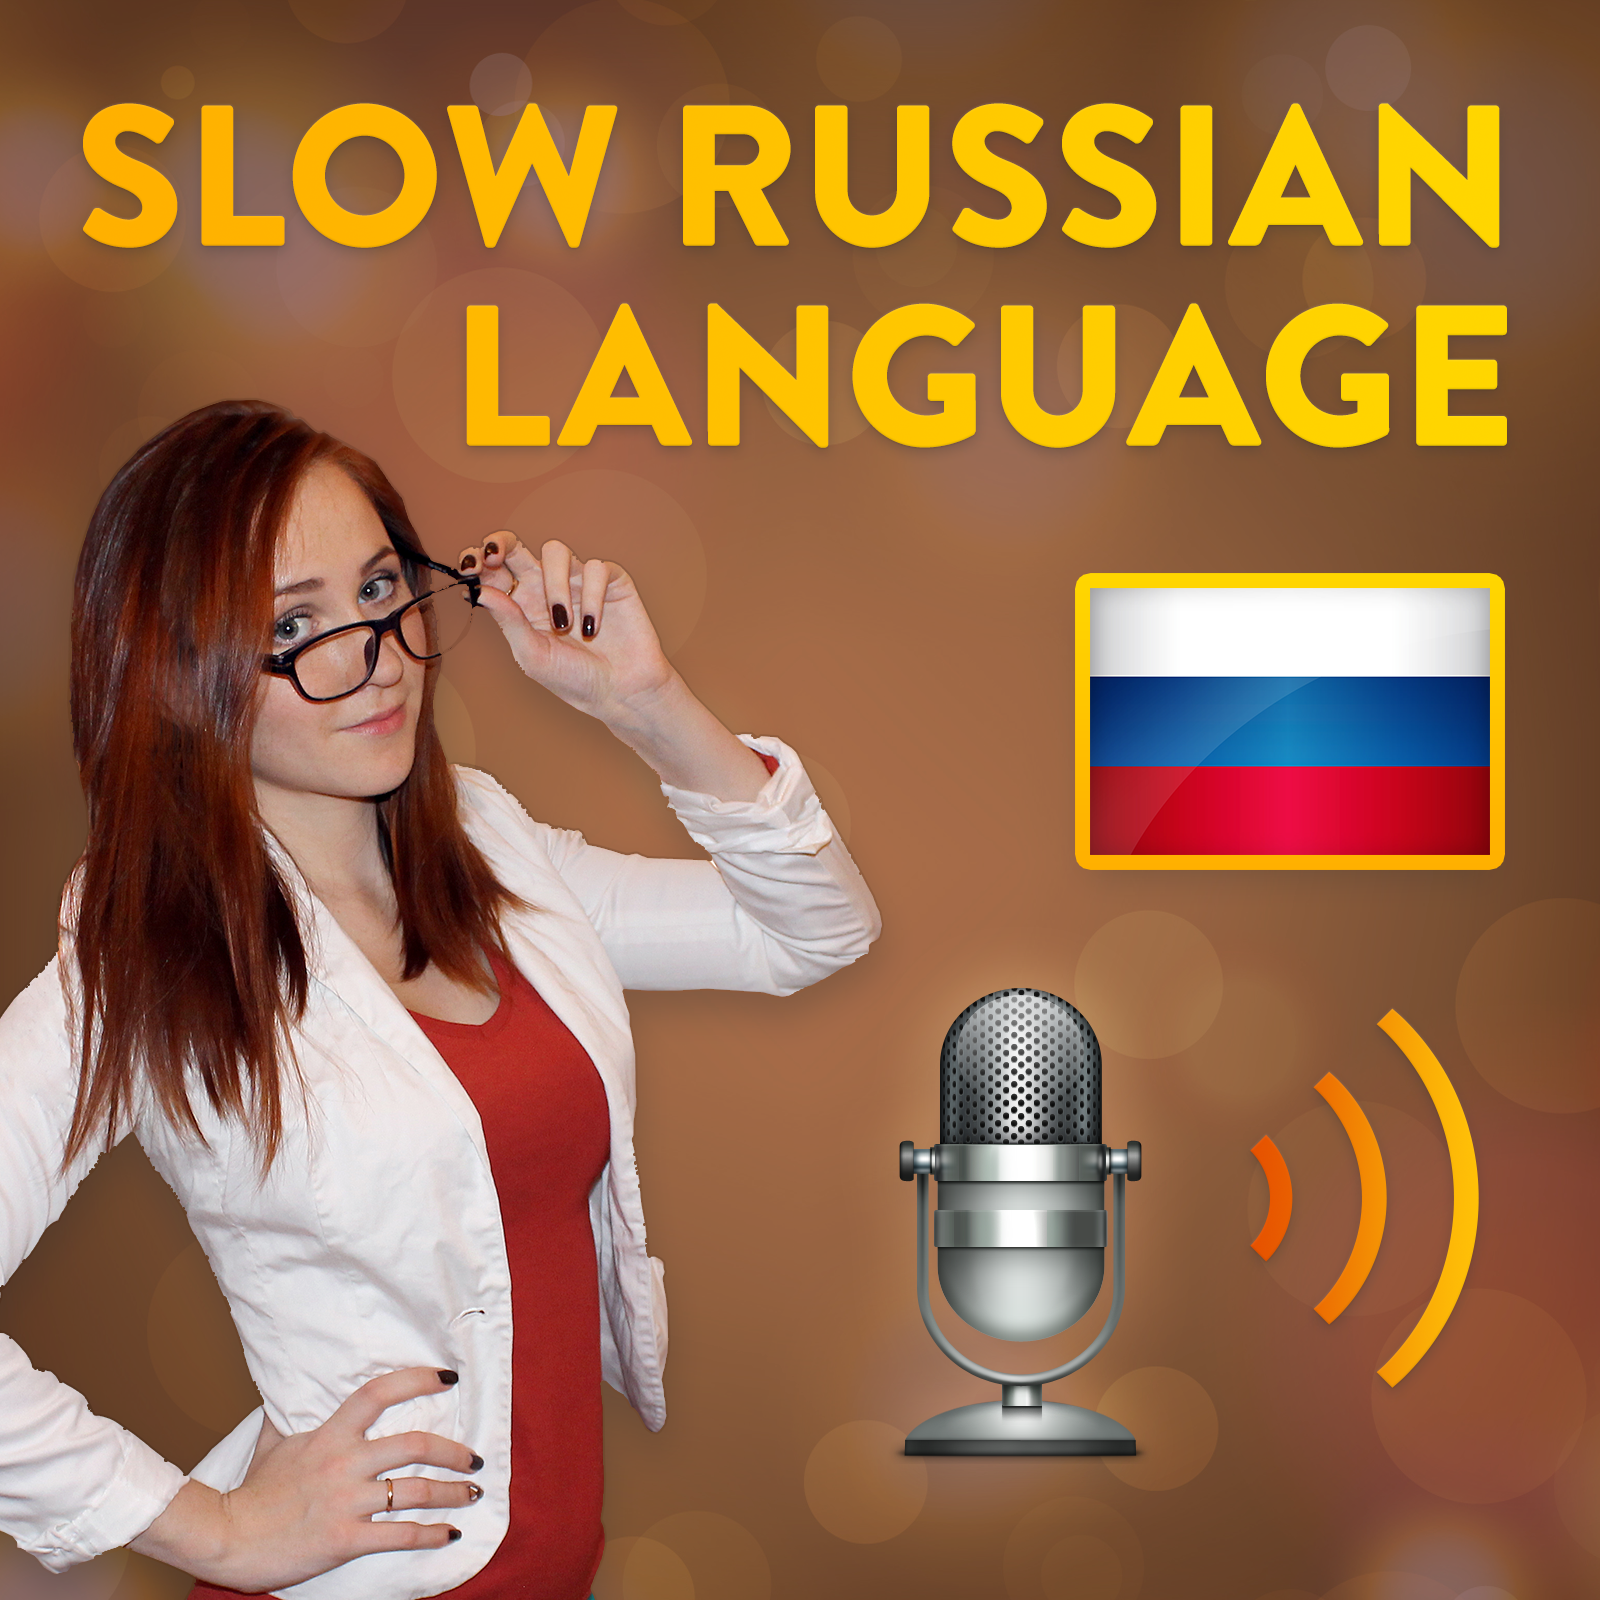 Fresh outta high. Армянский подкаст. Russian Podcast. Slow German. Speaking Russian Podcast.